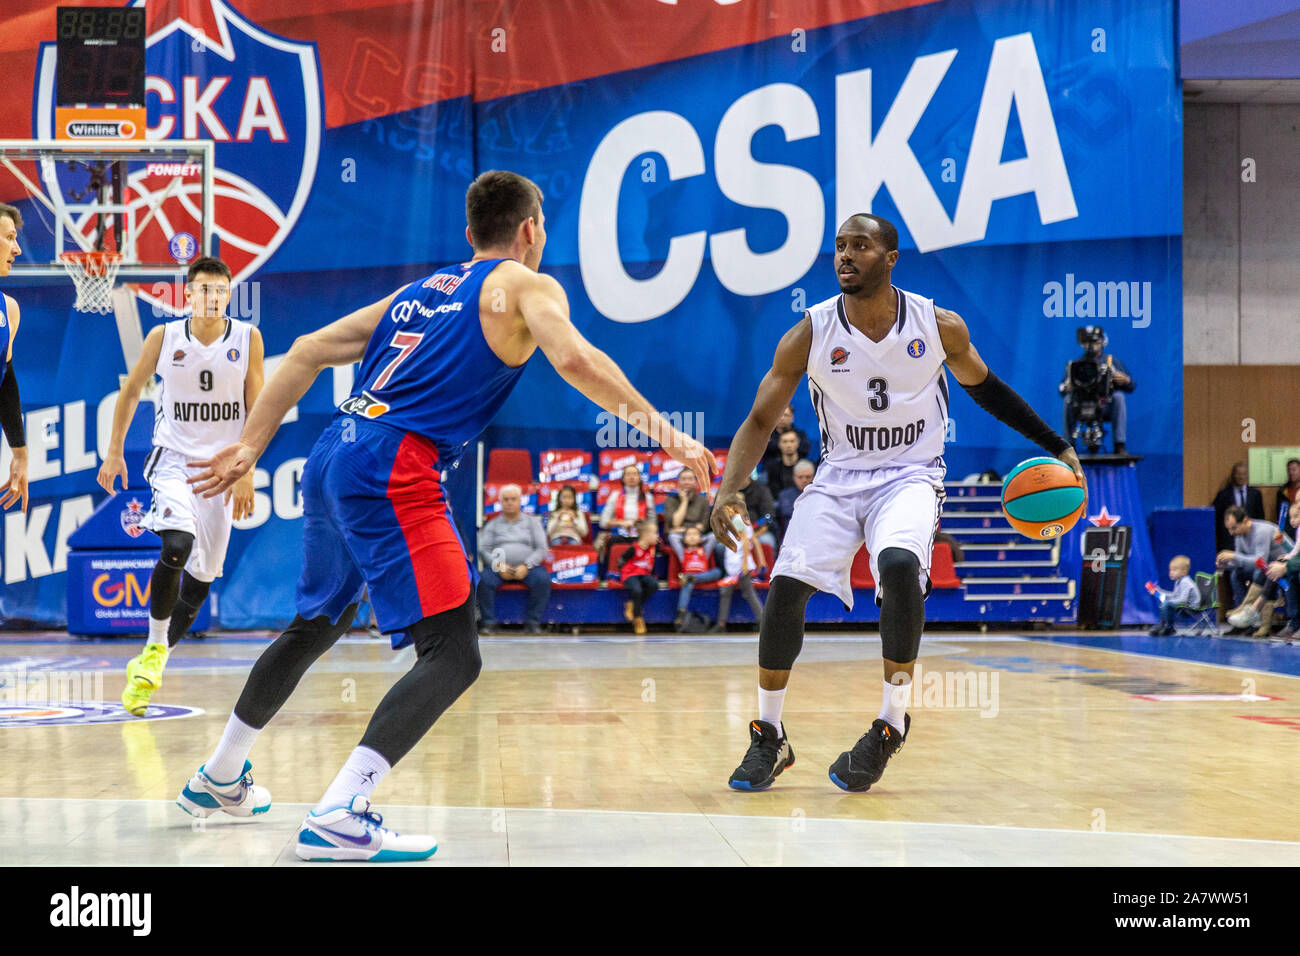 #3 Michael Umeh of Avtodor Saratov seen in action against CSKA Moscow during the VTB United League match in Moscow.(Final score; CSKA Moscow 103:79 Avtodor Saratov) Stock Photo